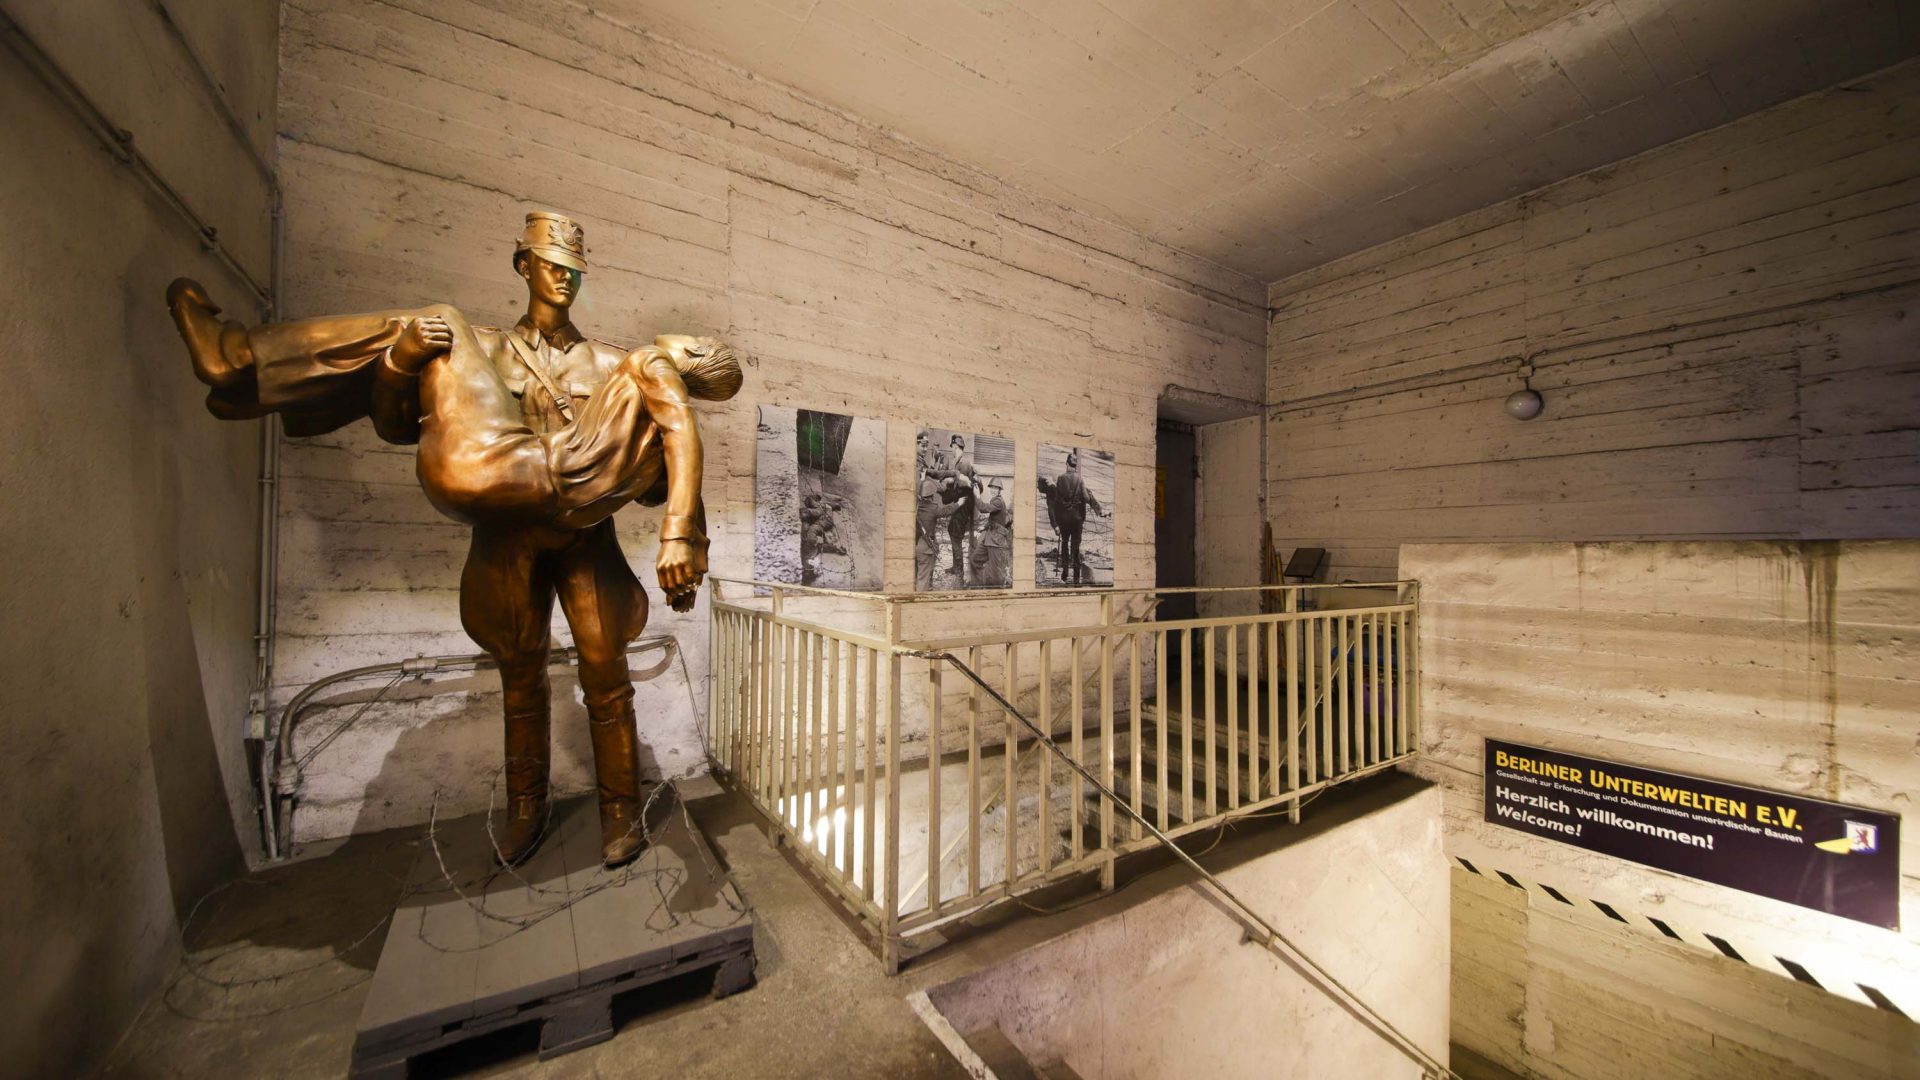 Today, visitors can take underground tours to see the the tunnels and hear tales of escape from East Berlin.